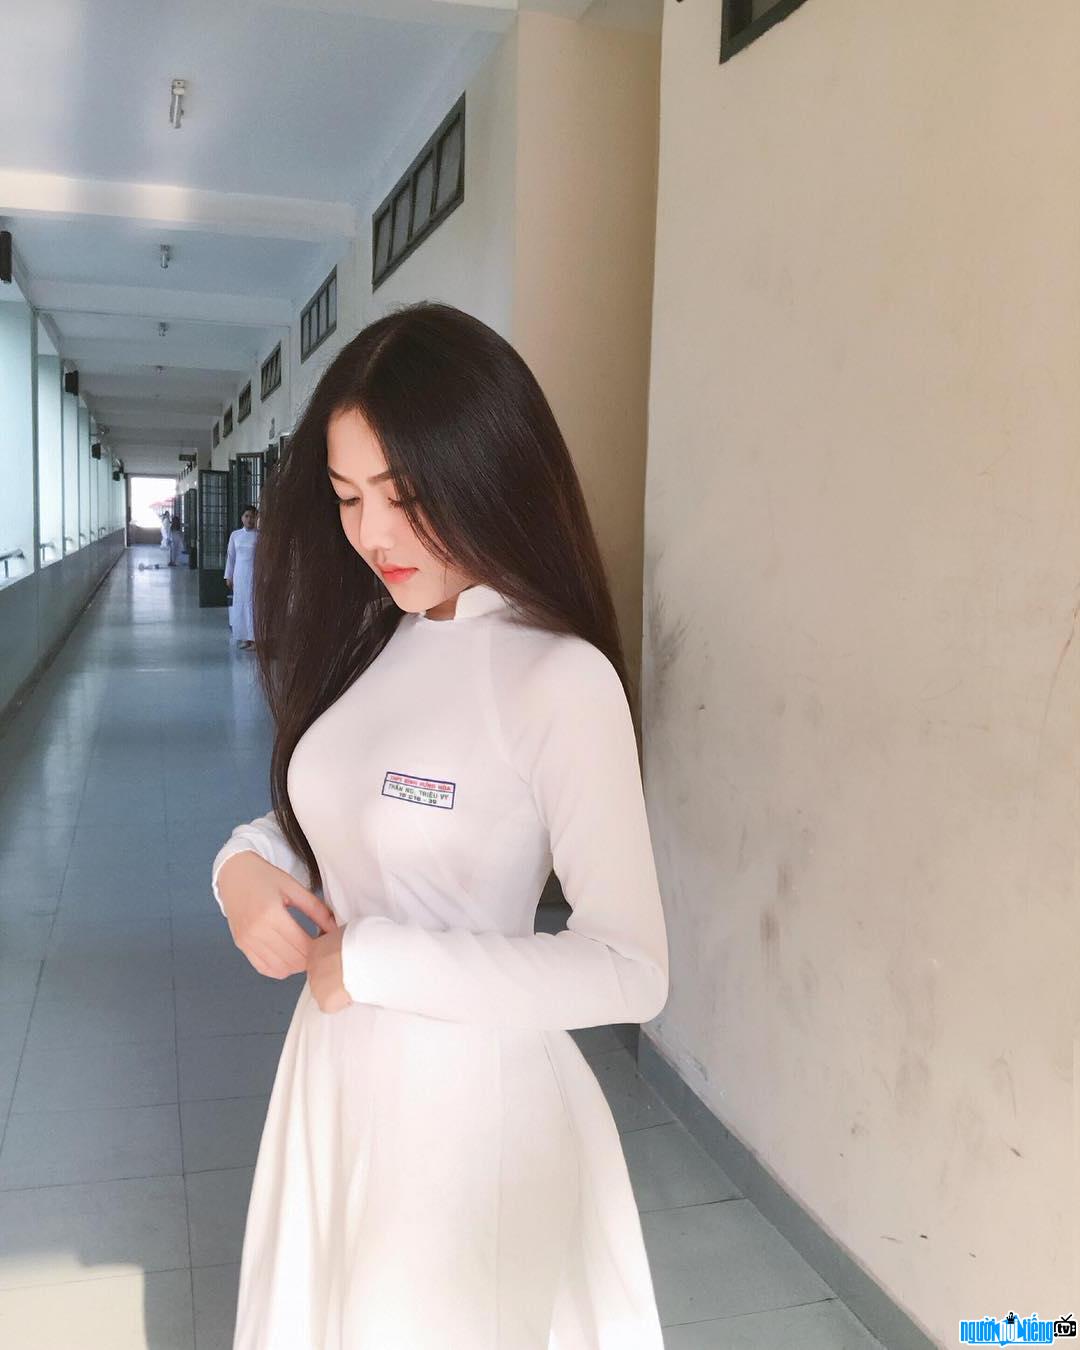  Trieu Vy is attractively beautiful in white ao dai